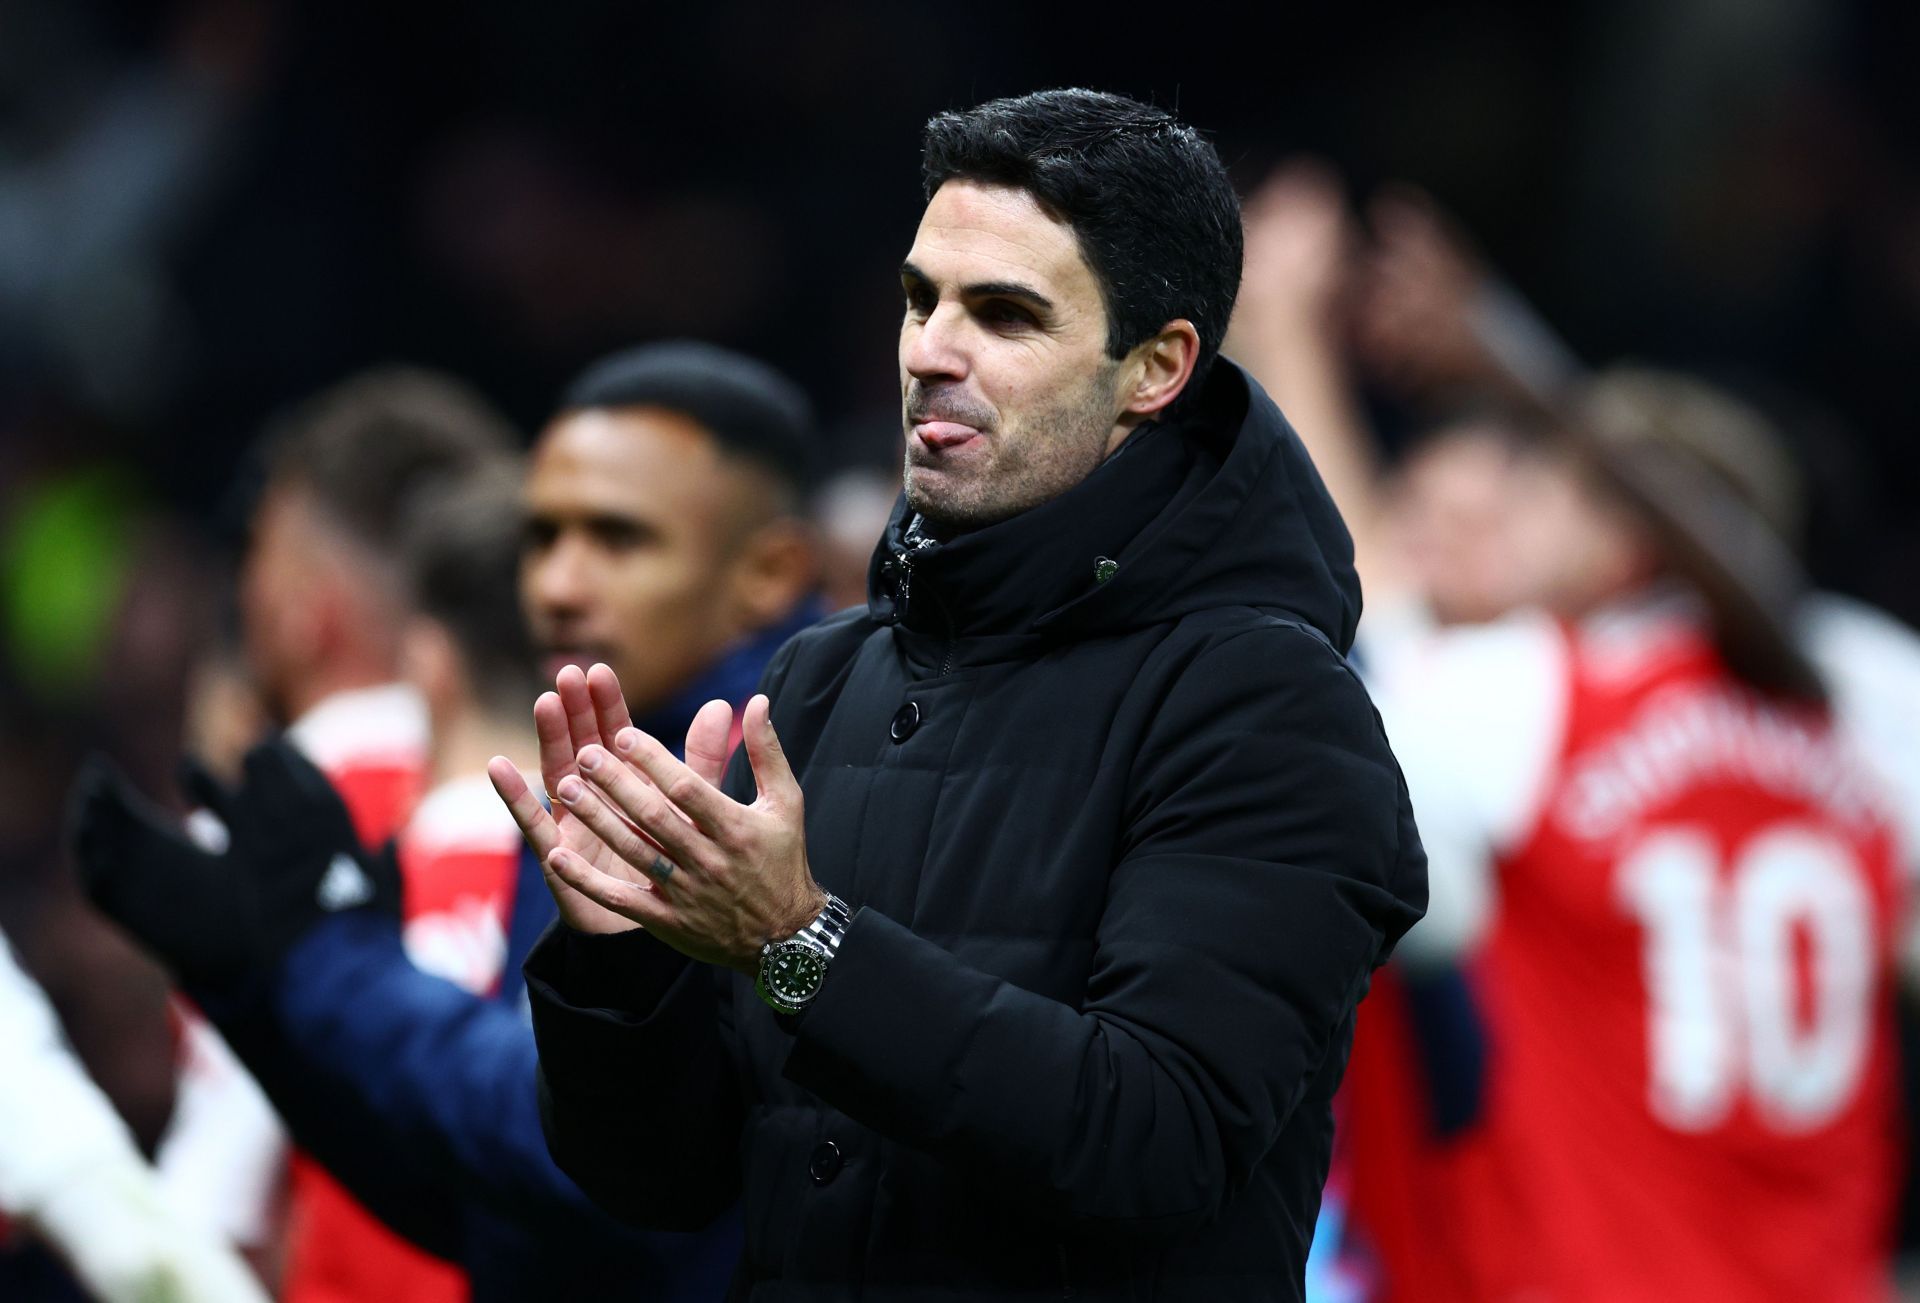 Mikel Arteta picked up his third Manager of the Month award of the season.